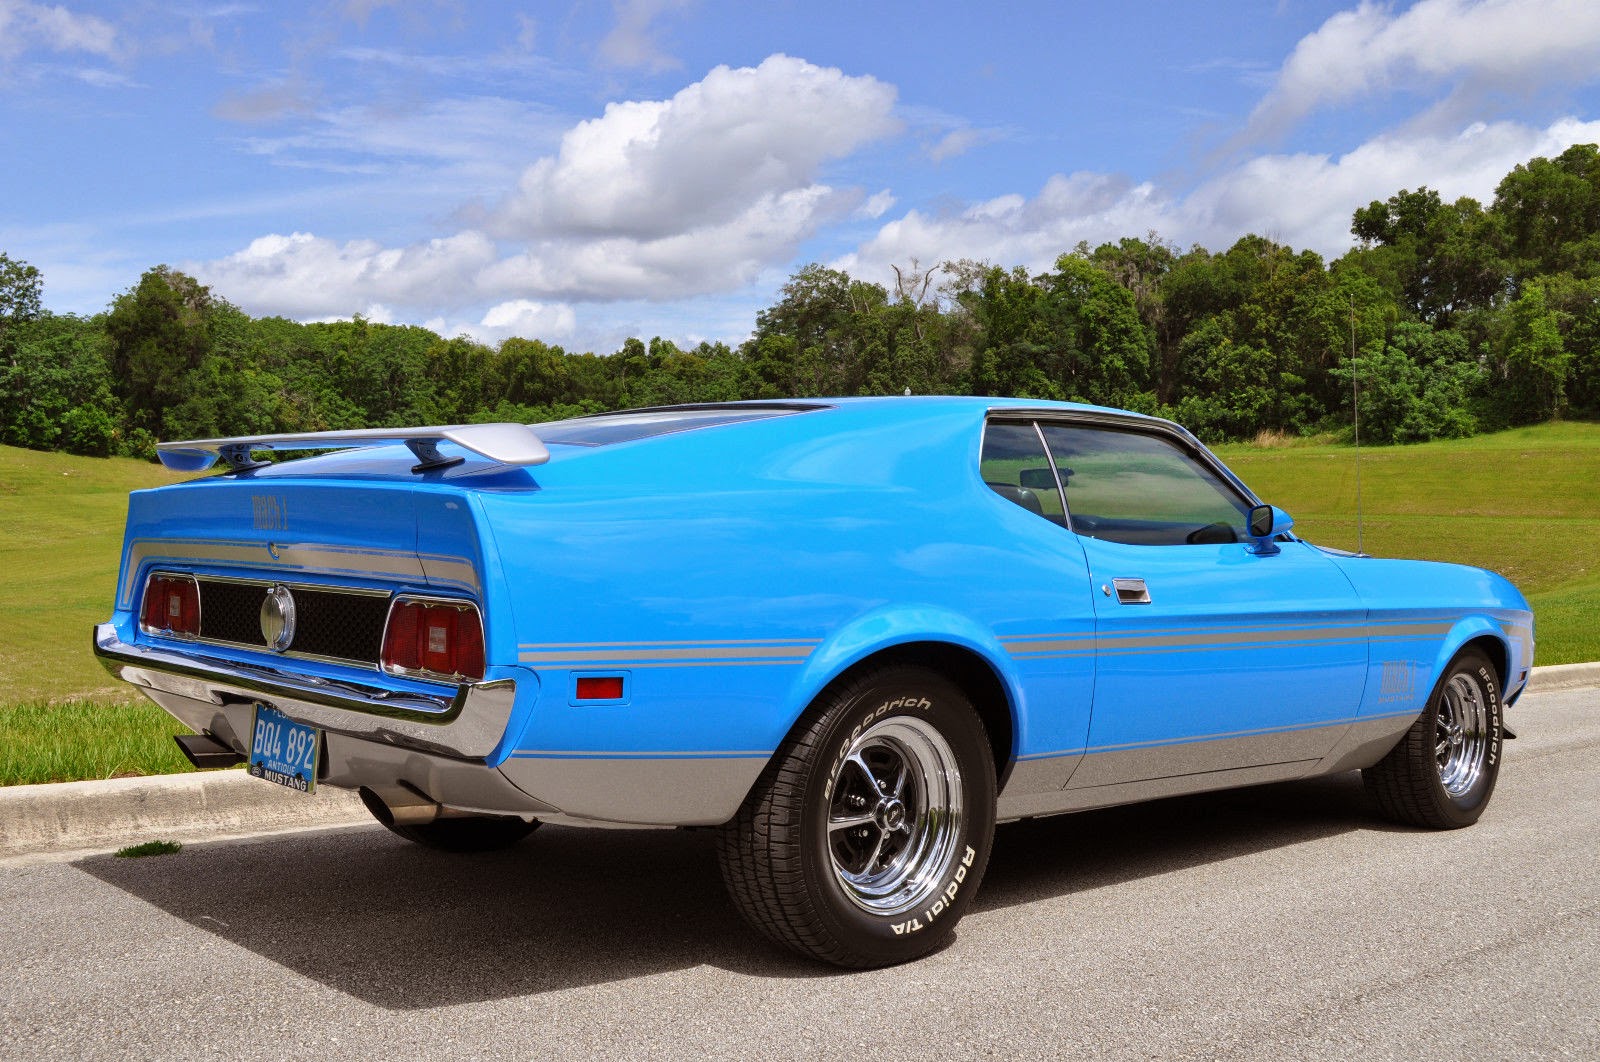 1973 Ford Mustang Mach 1 Q Code ~ For Sale American Muscle Cars